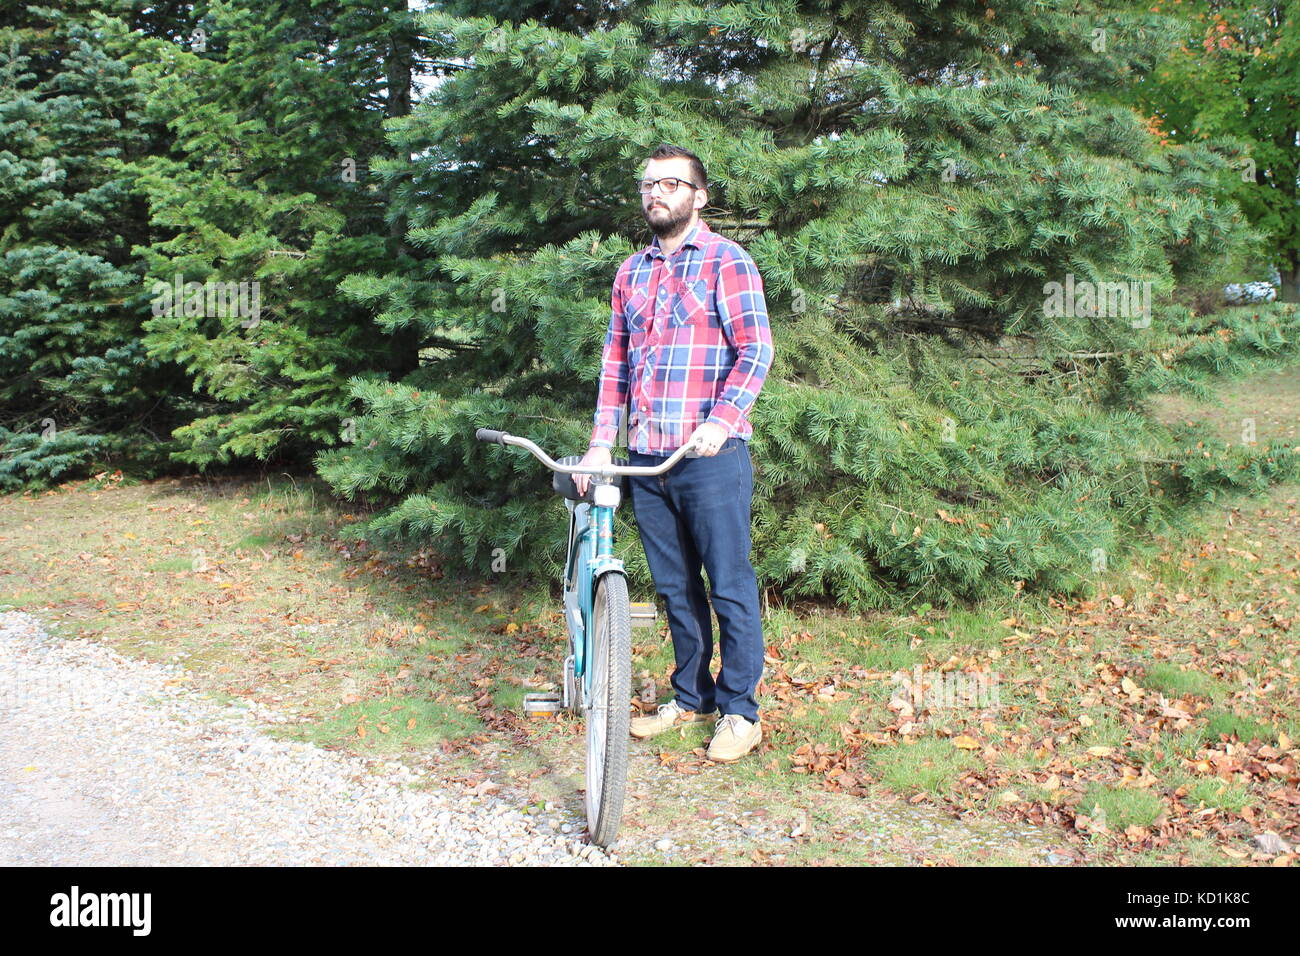 A man and model wearing a flannel plaid shirt with blue jeans rides and poses with a vintage bike/bicycle in the country Stock Photo